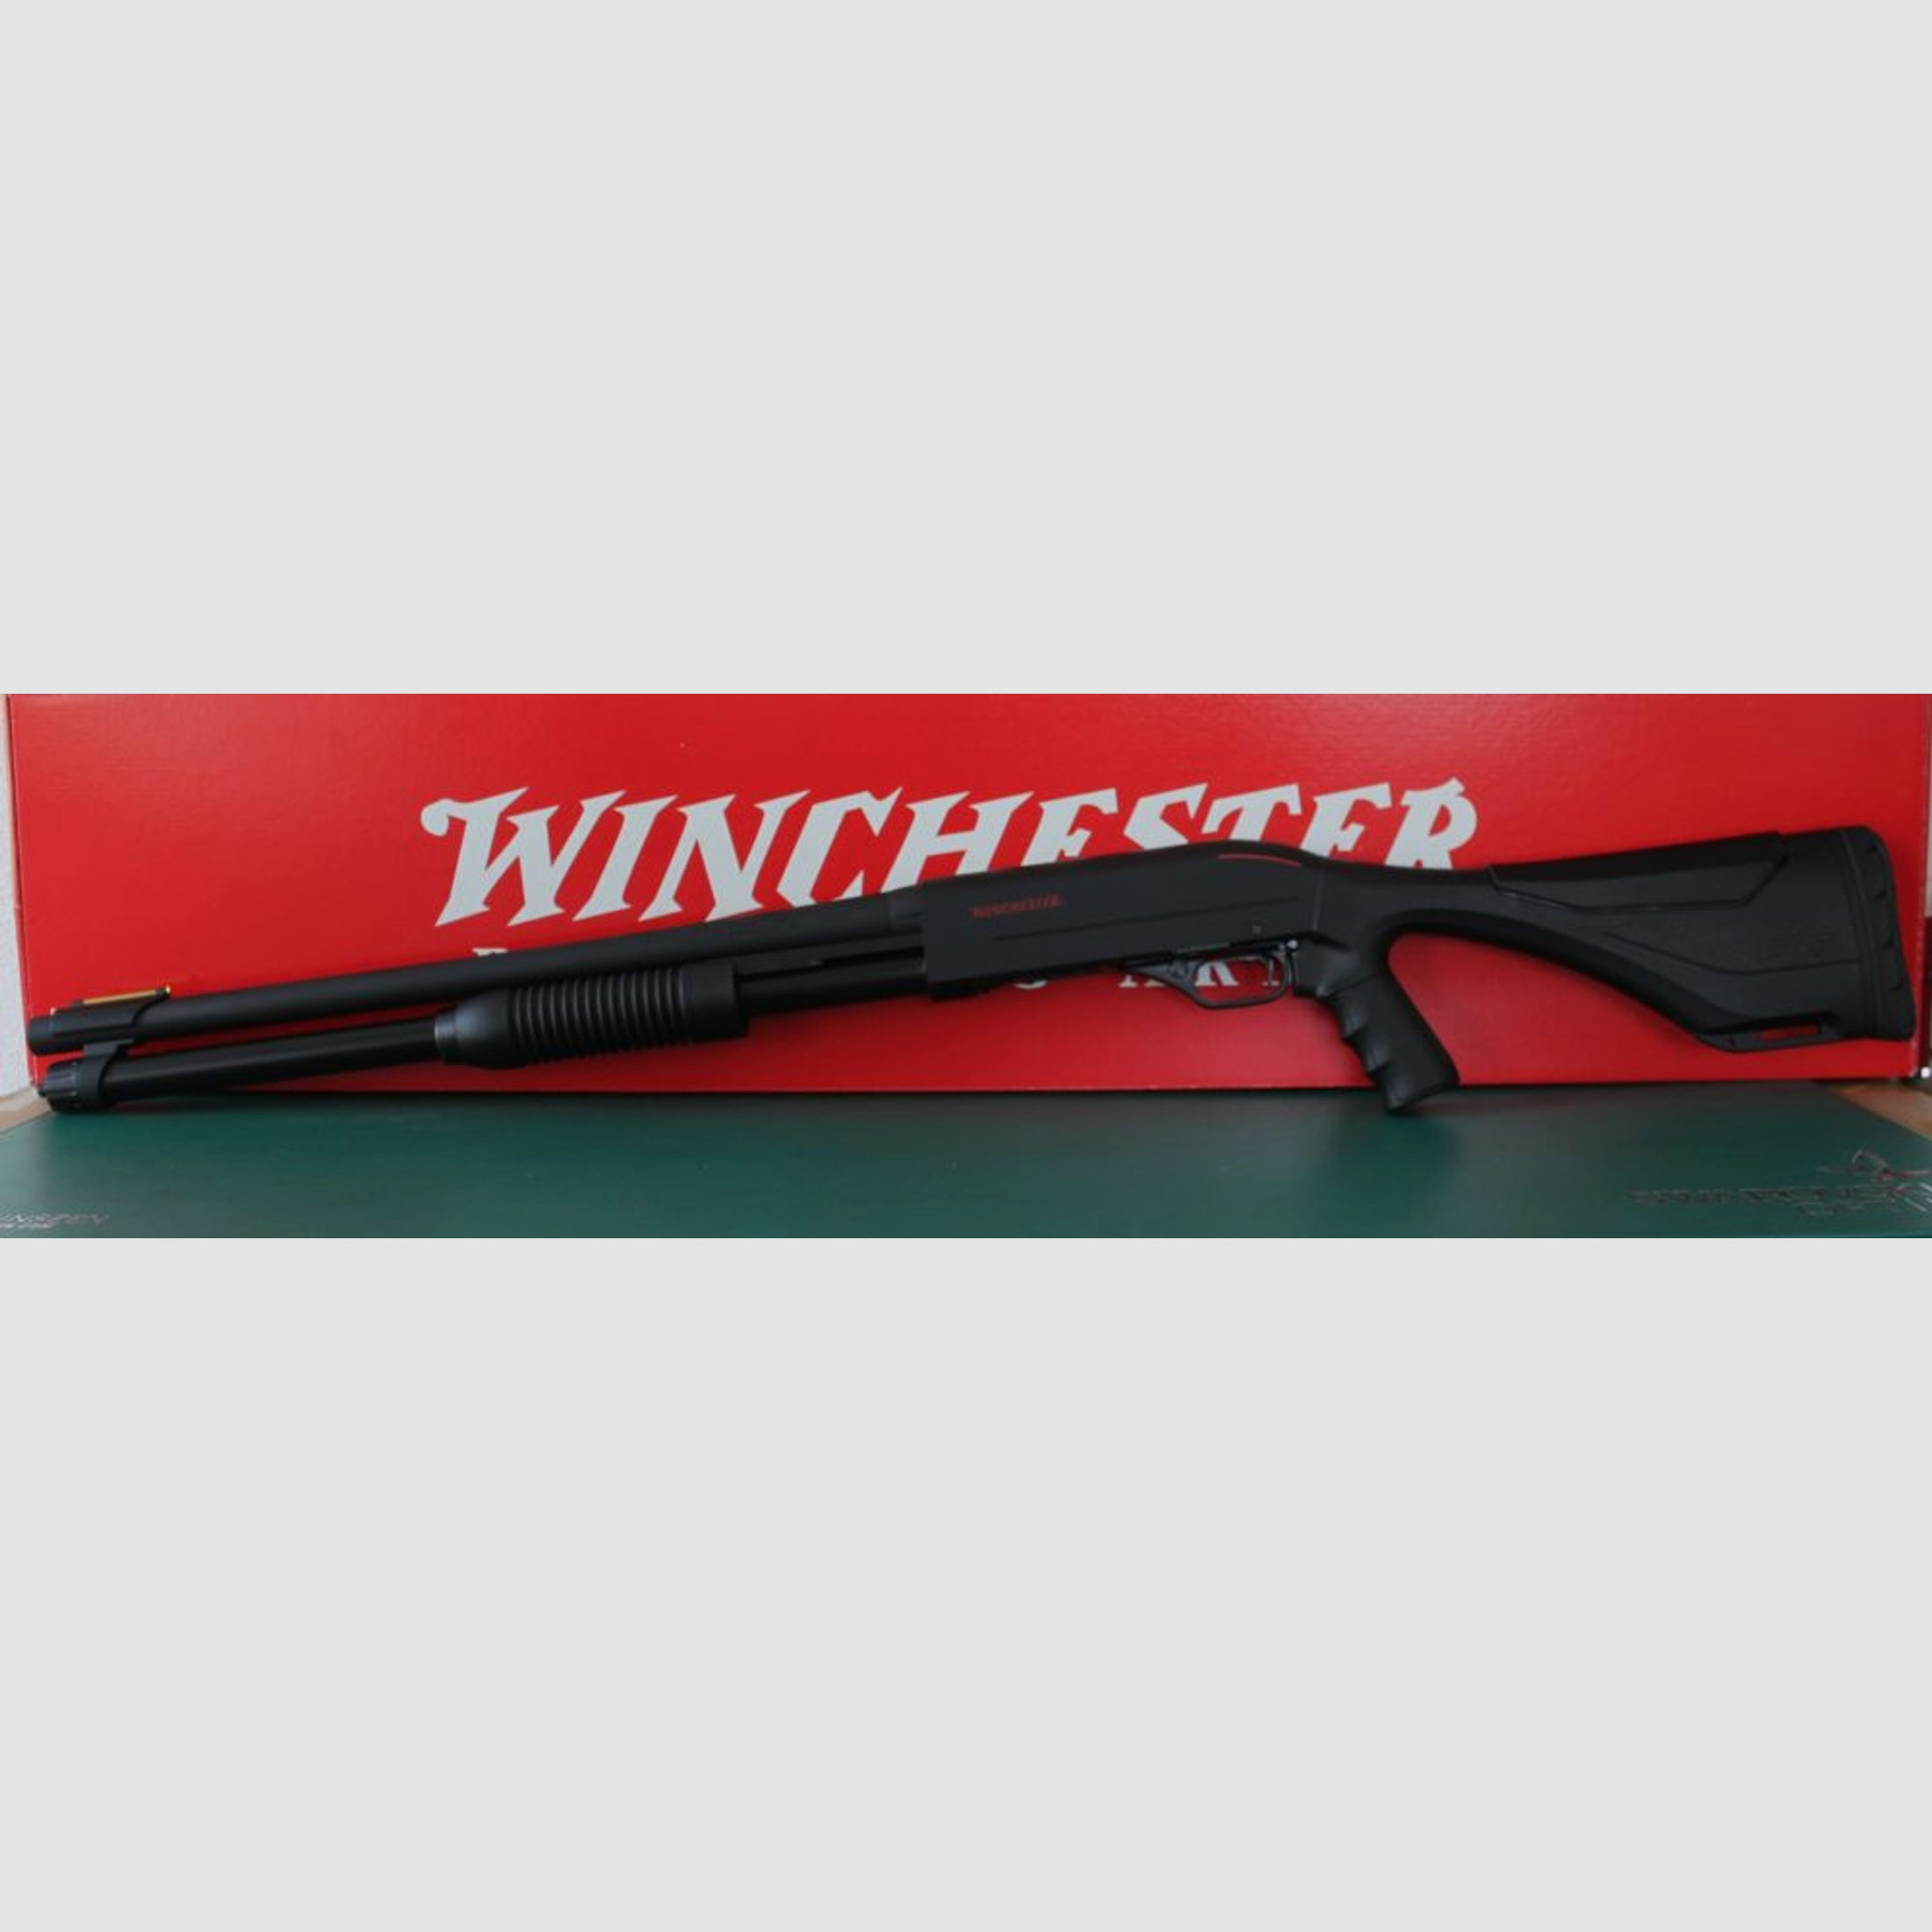 WINCHESTER	 SXP EXTREME DEFENDER High Capacity